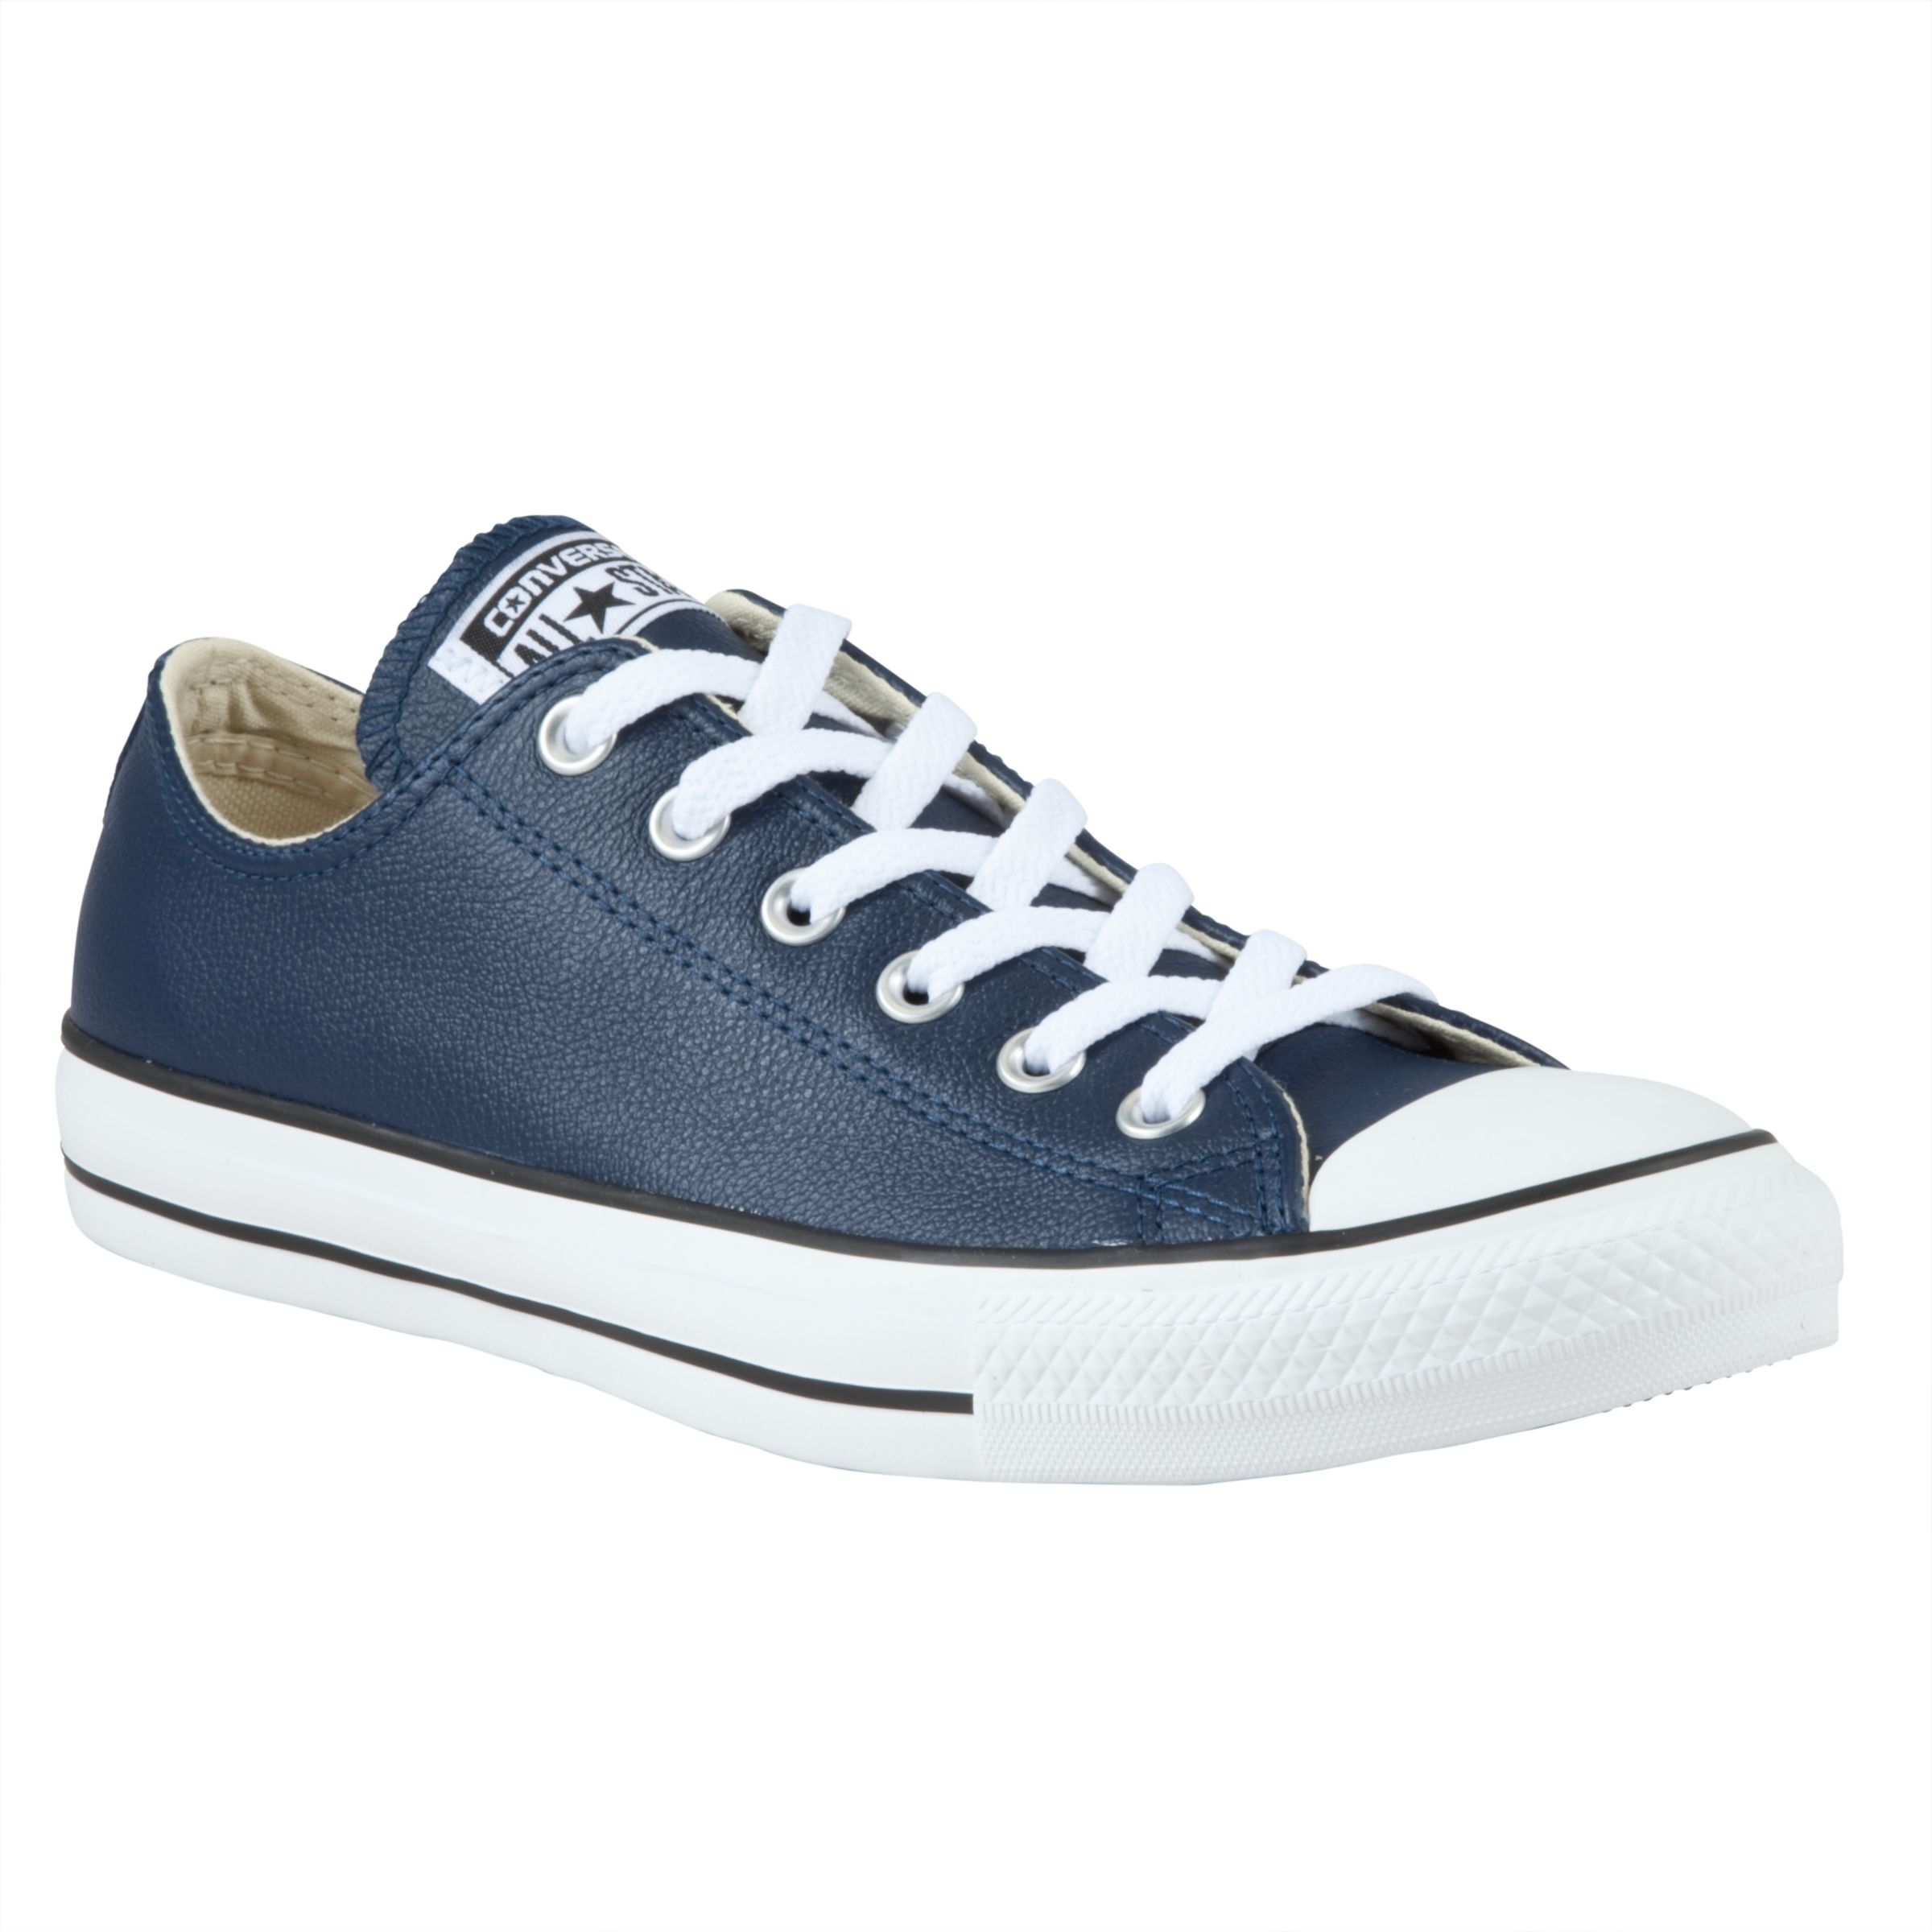 converse all star navy leather